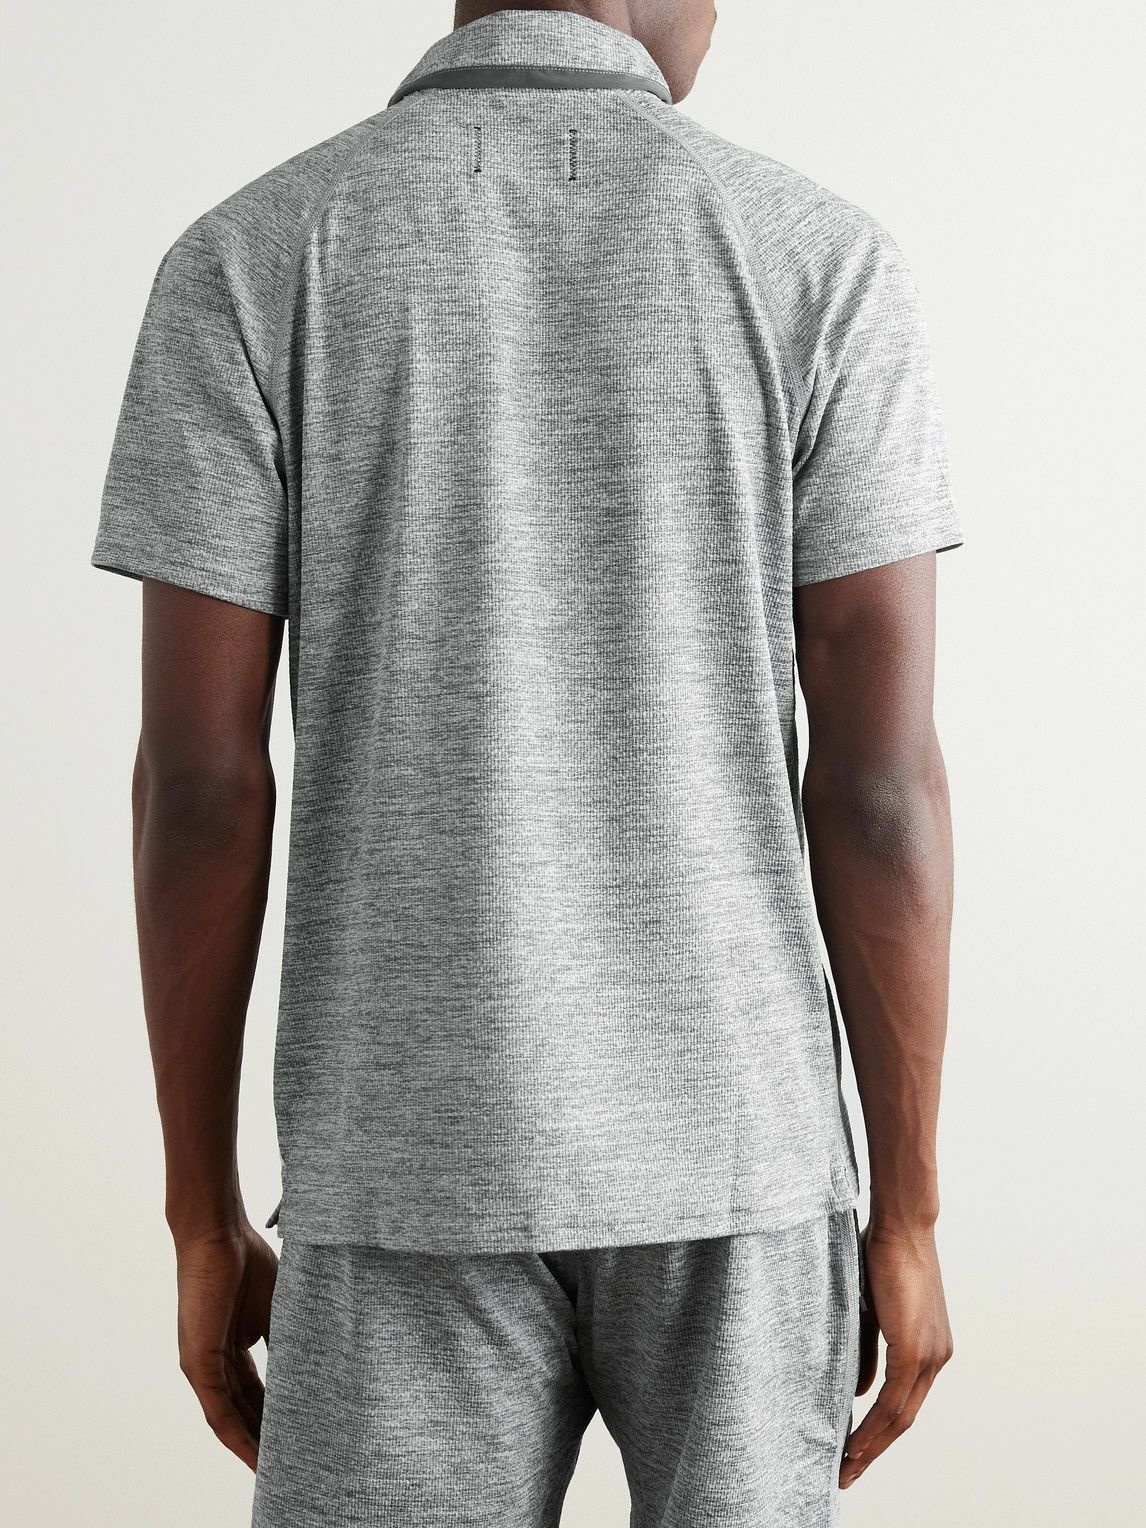 Reigning Champ - Solotex® Mesh Polo Shirt - Gray Reigning Champ